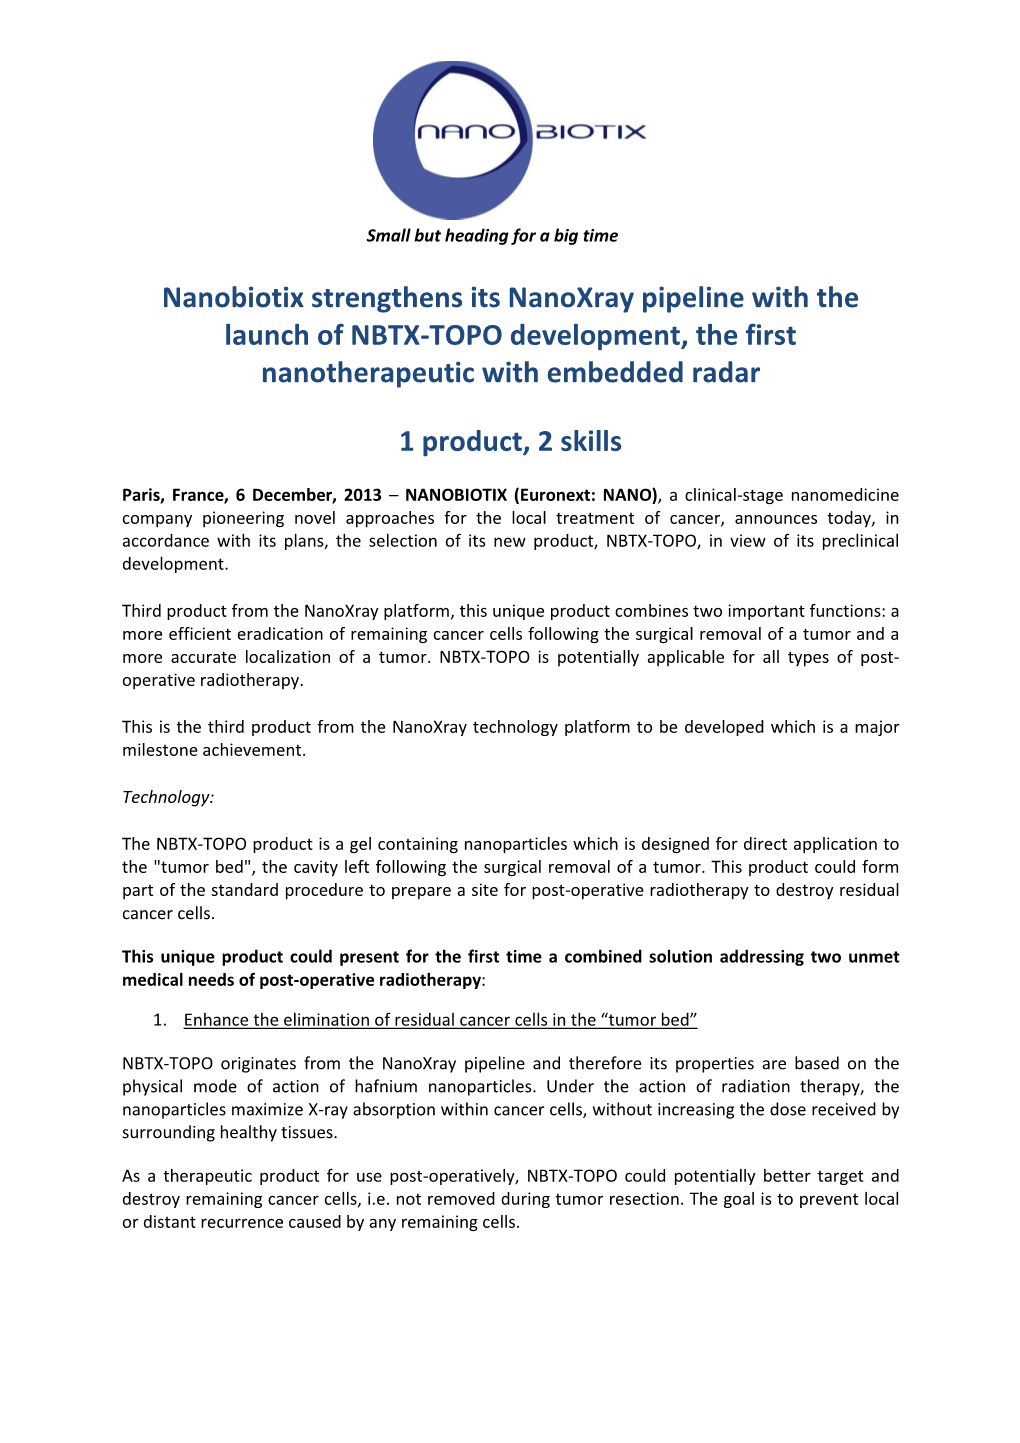 Nanobiotix Strengthens Its Nanoxray Pipeline with the Launch of NBTX-TOPO Development, the First Nanotherapeutic with Embedded Radar